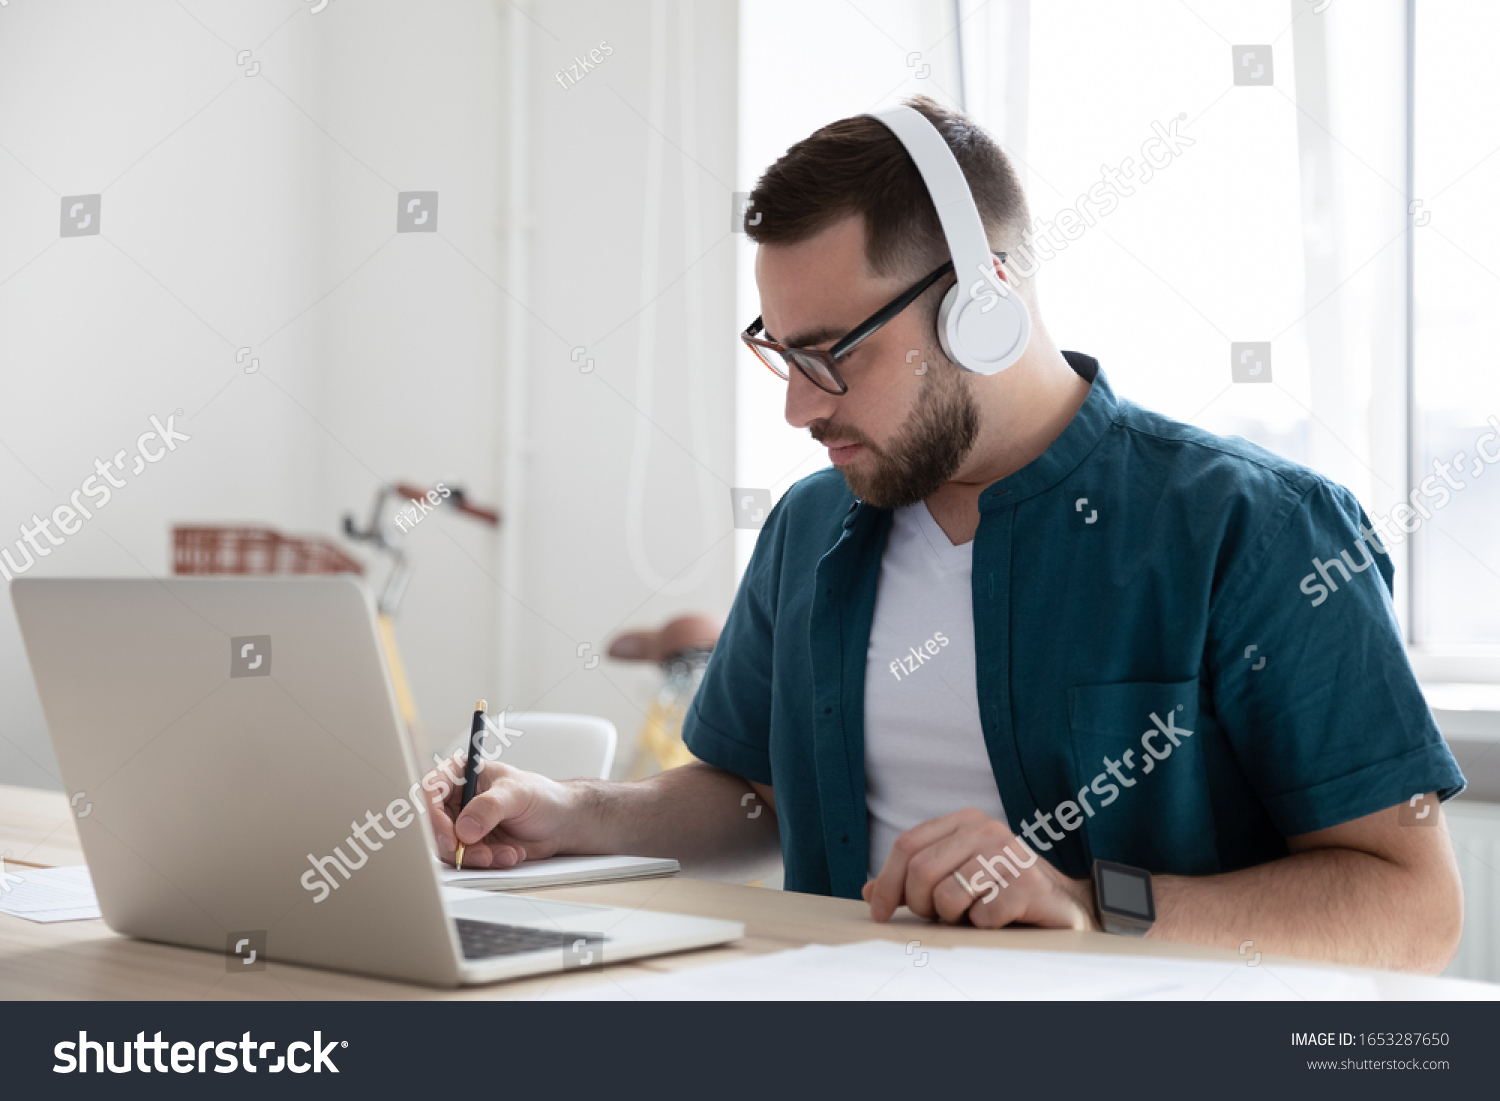 Focused young man businessman company worker employee in glasses wearing wireless headphones, watching educational webinar lecture seminar on laptop online, writing down notes in modern office. #1653287650